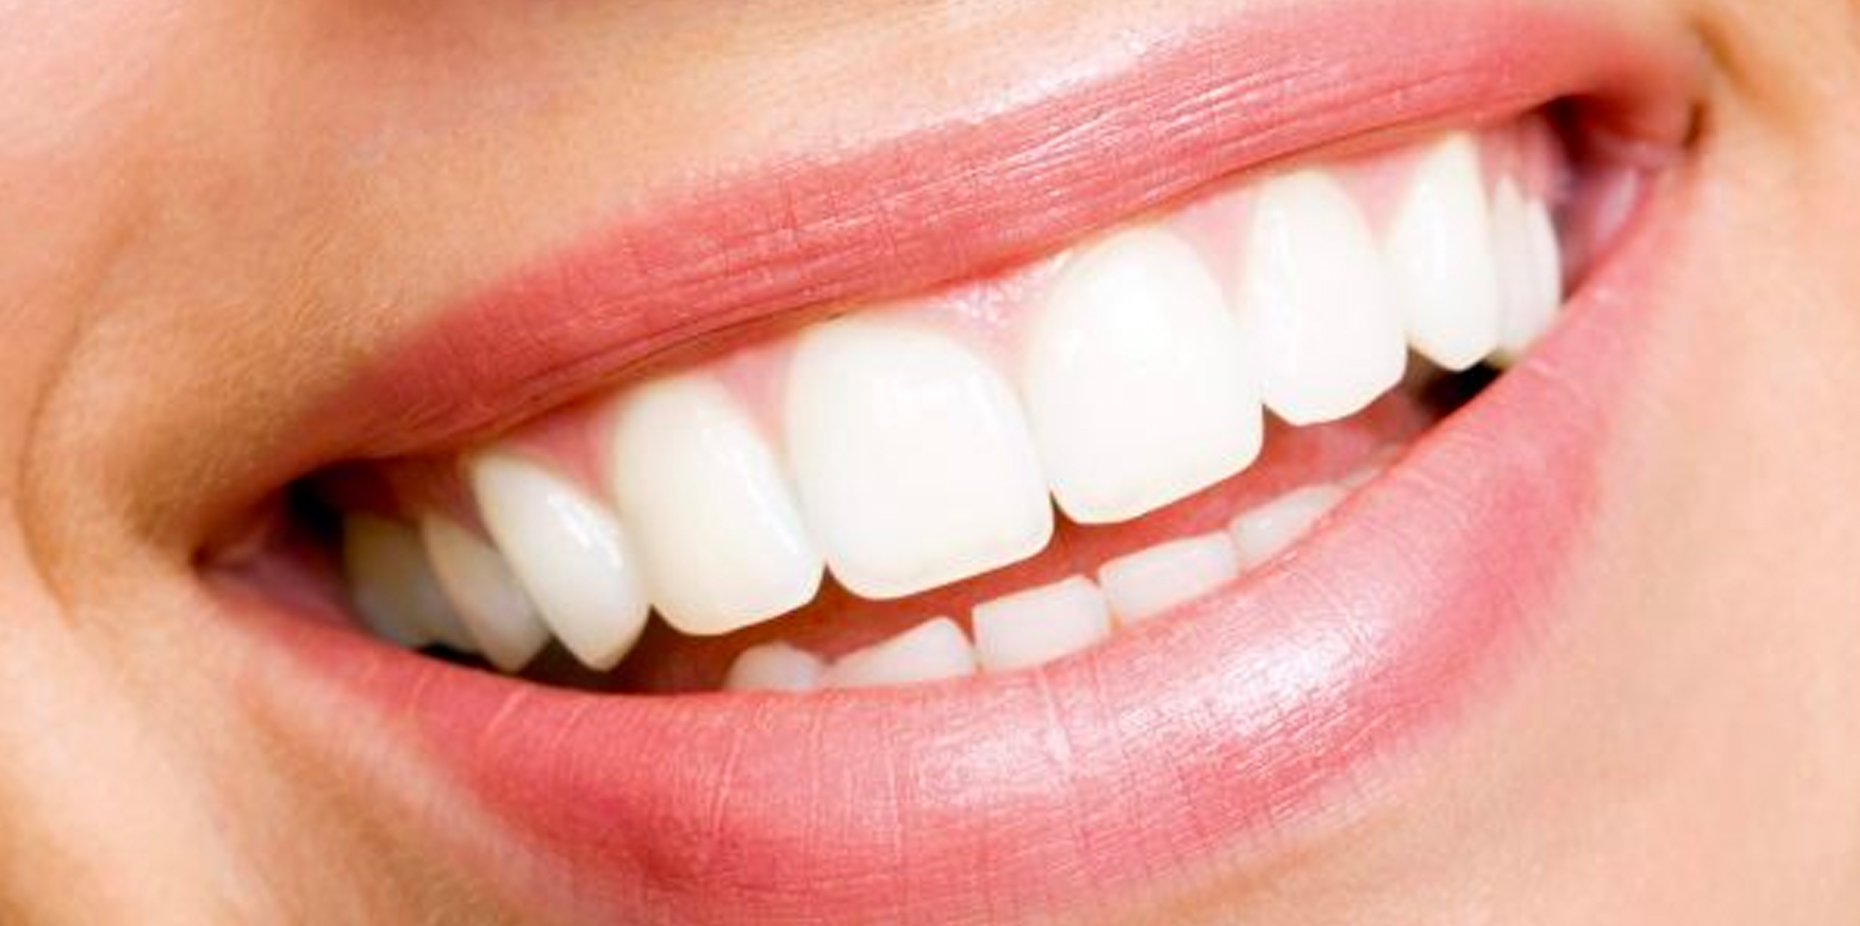 How to Whiten Teeth at Home – 11 Natural Ways